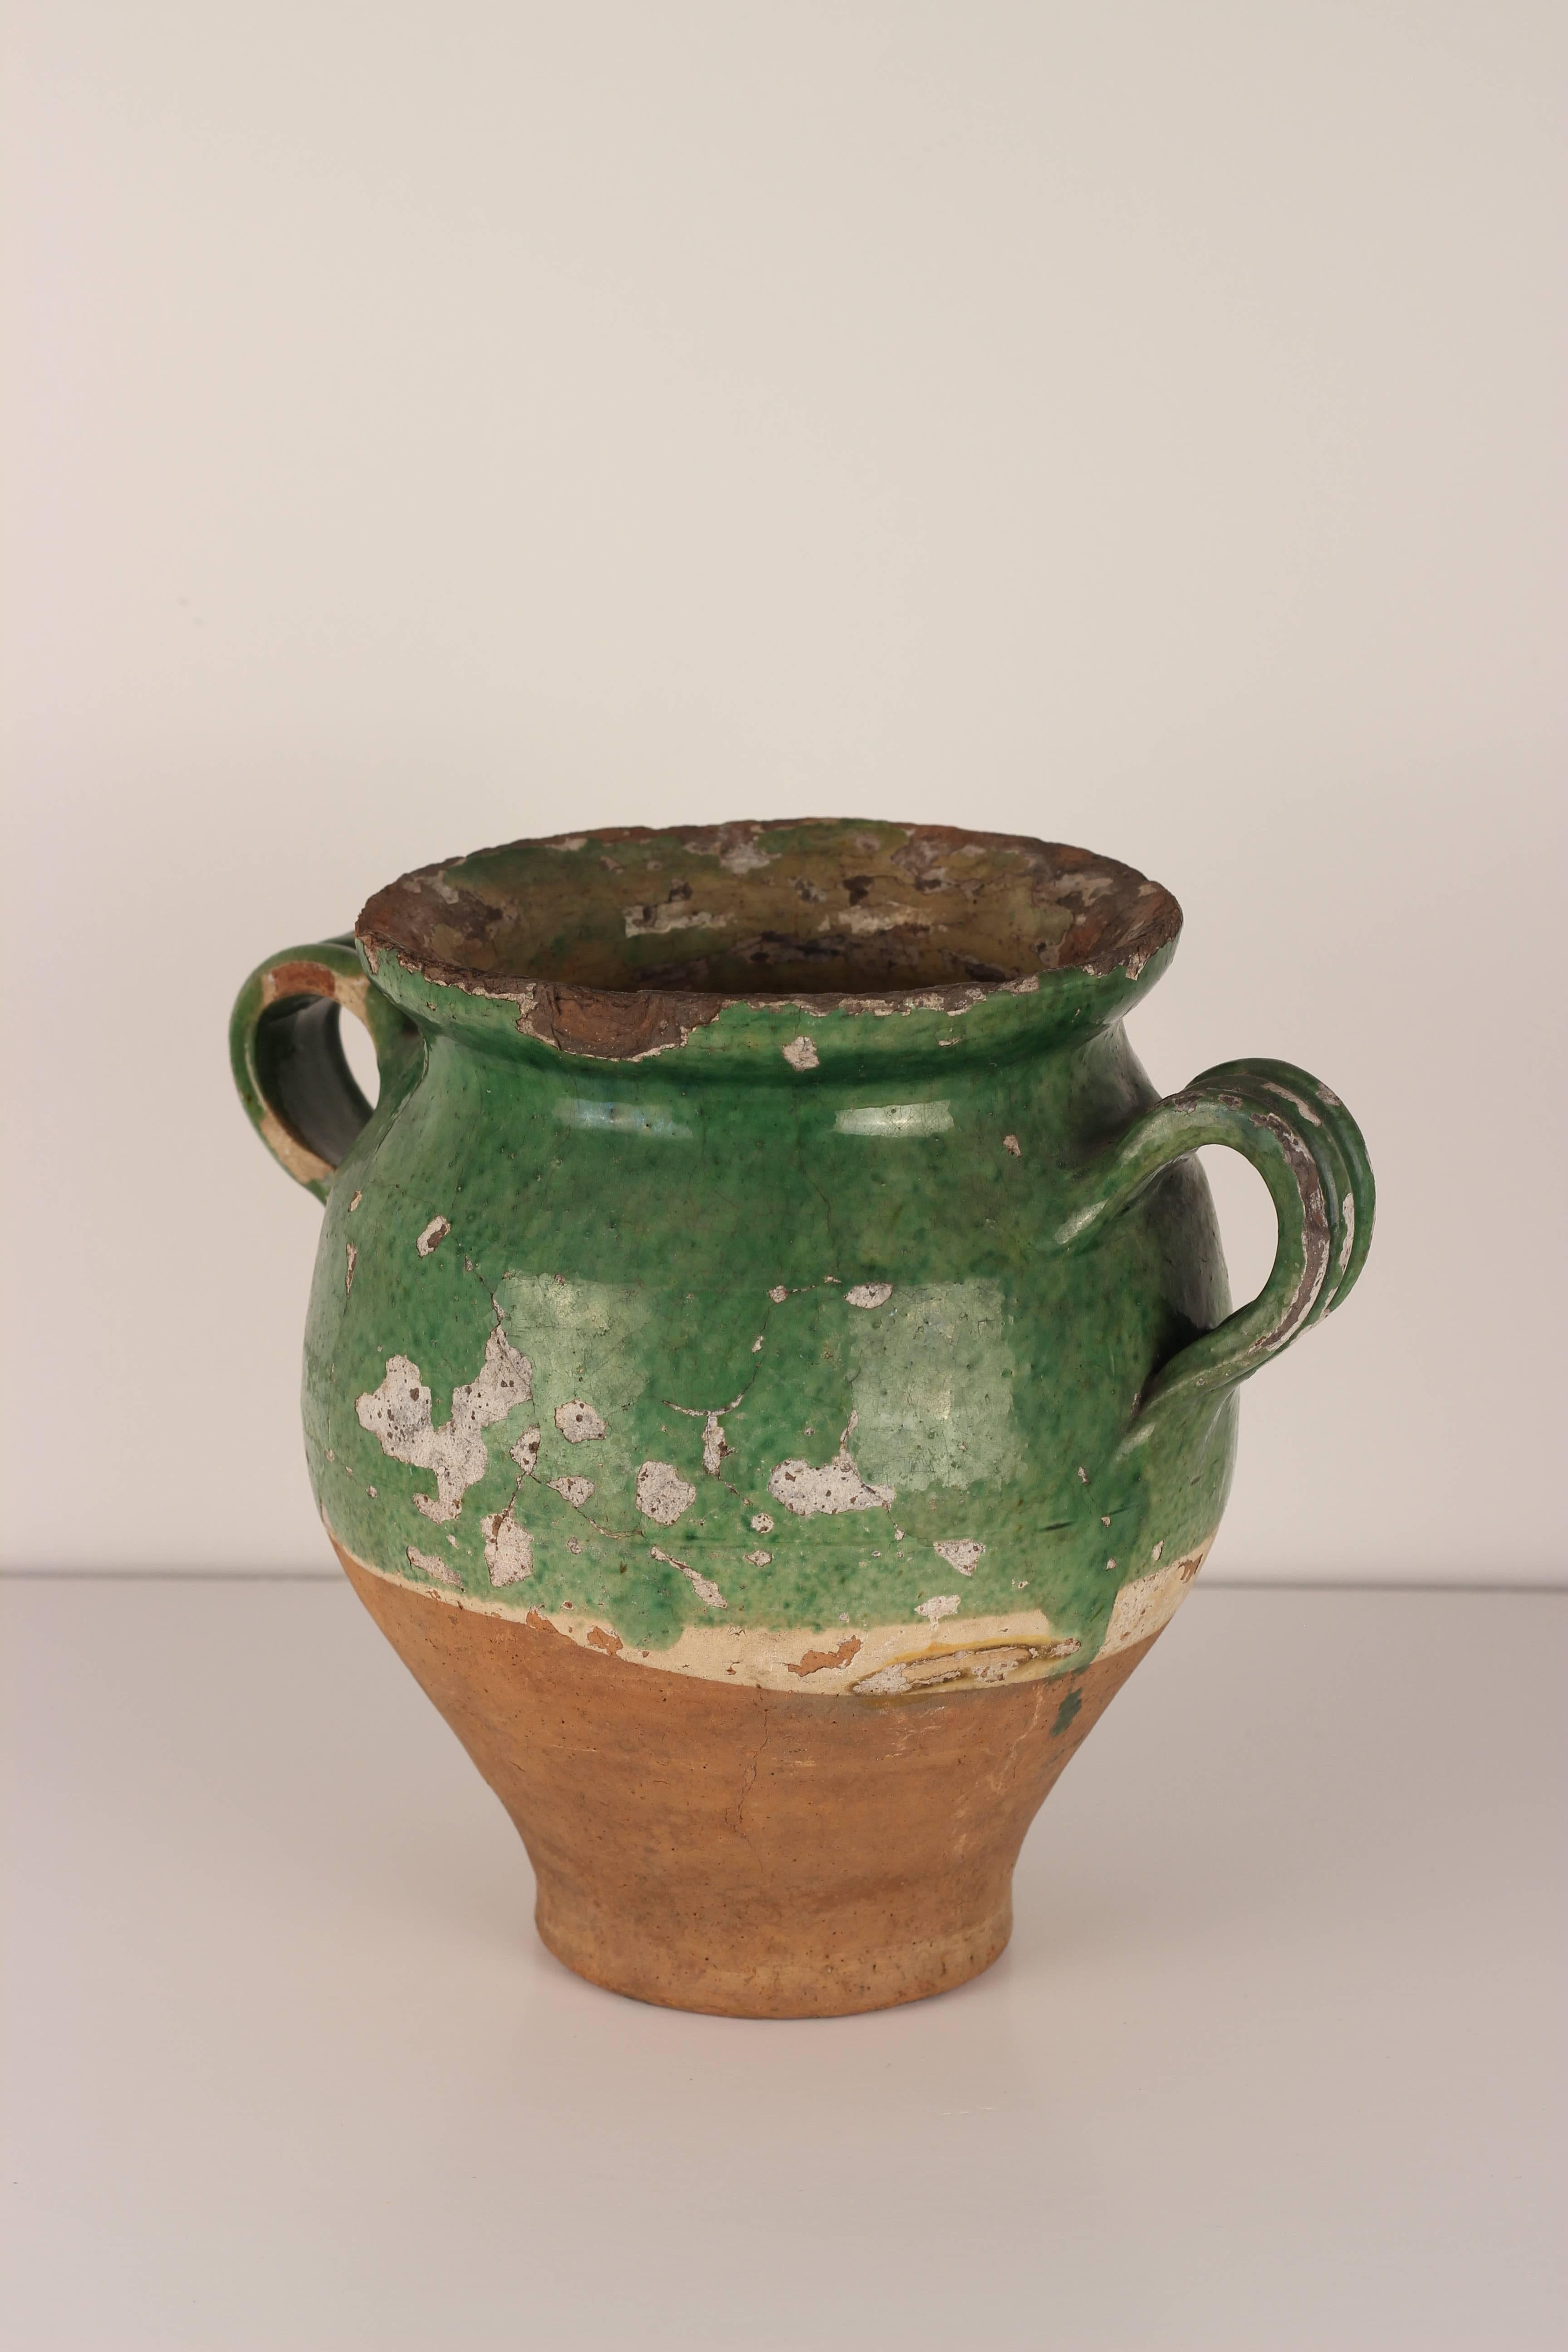 French Provincial Rare Green Confit Pot from the South of France, 19th Century